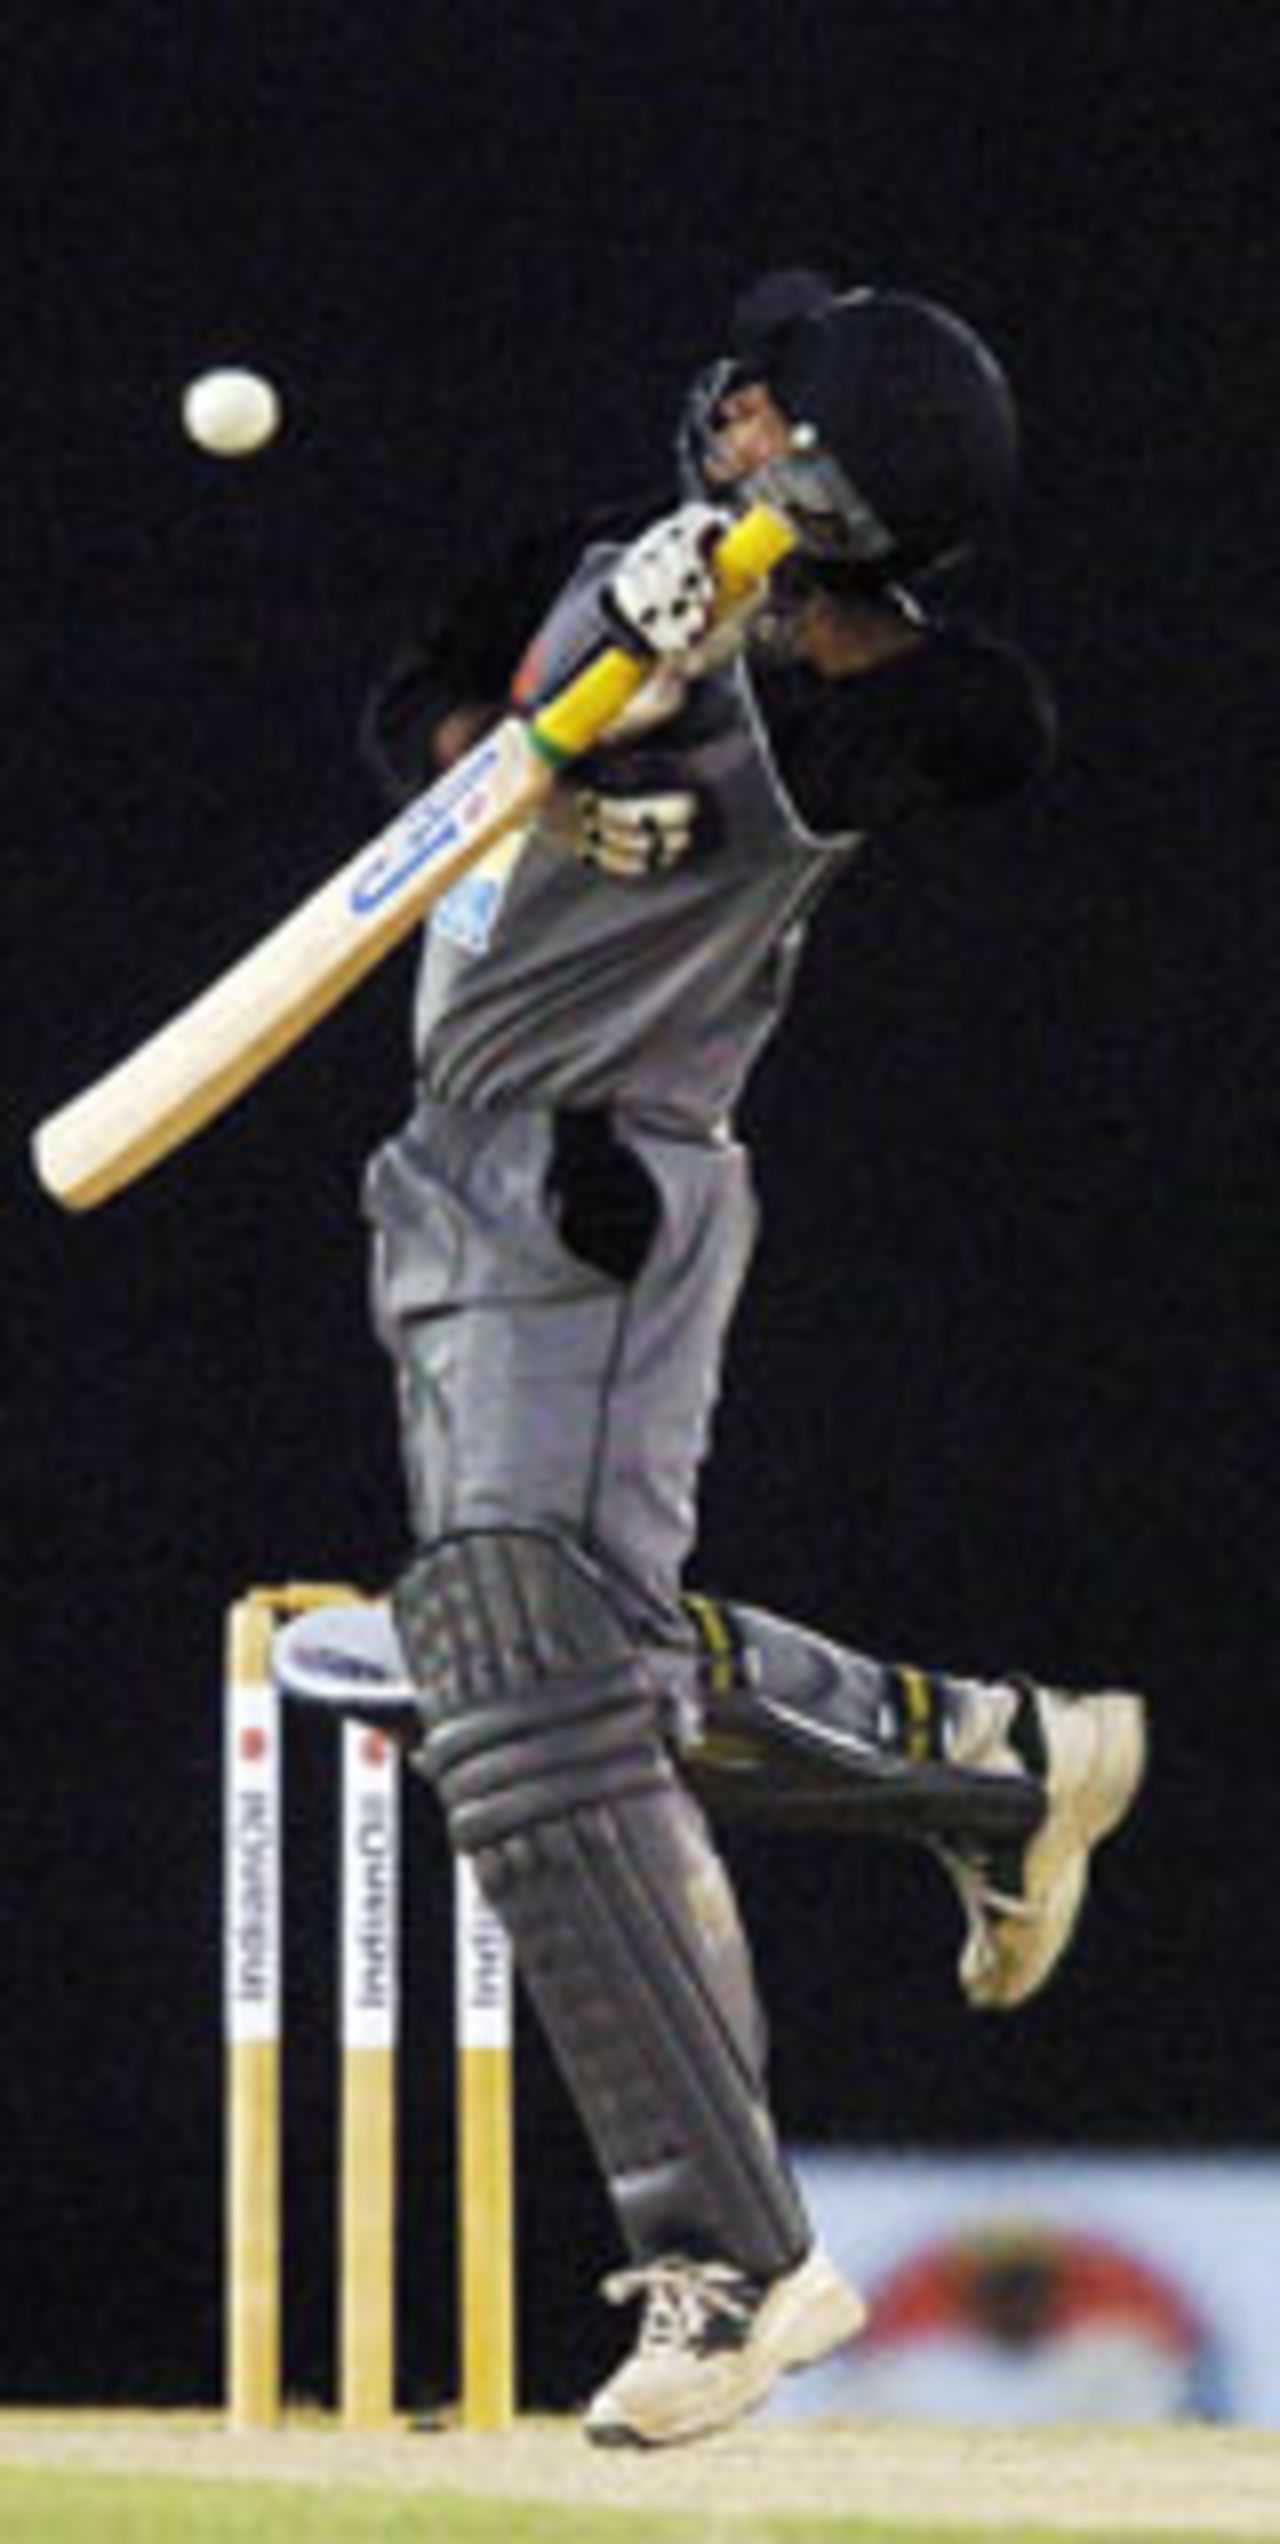 Arshad Ali nicks a sharp, rising ball from Irfan Pathan through to Rahul Dravid behind the stumps, India v UAE, Asia Cup, July 16 2004